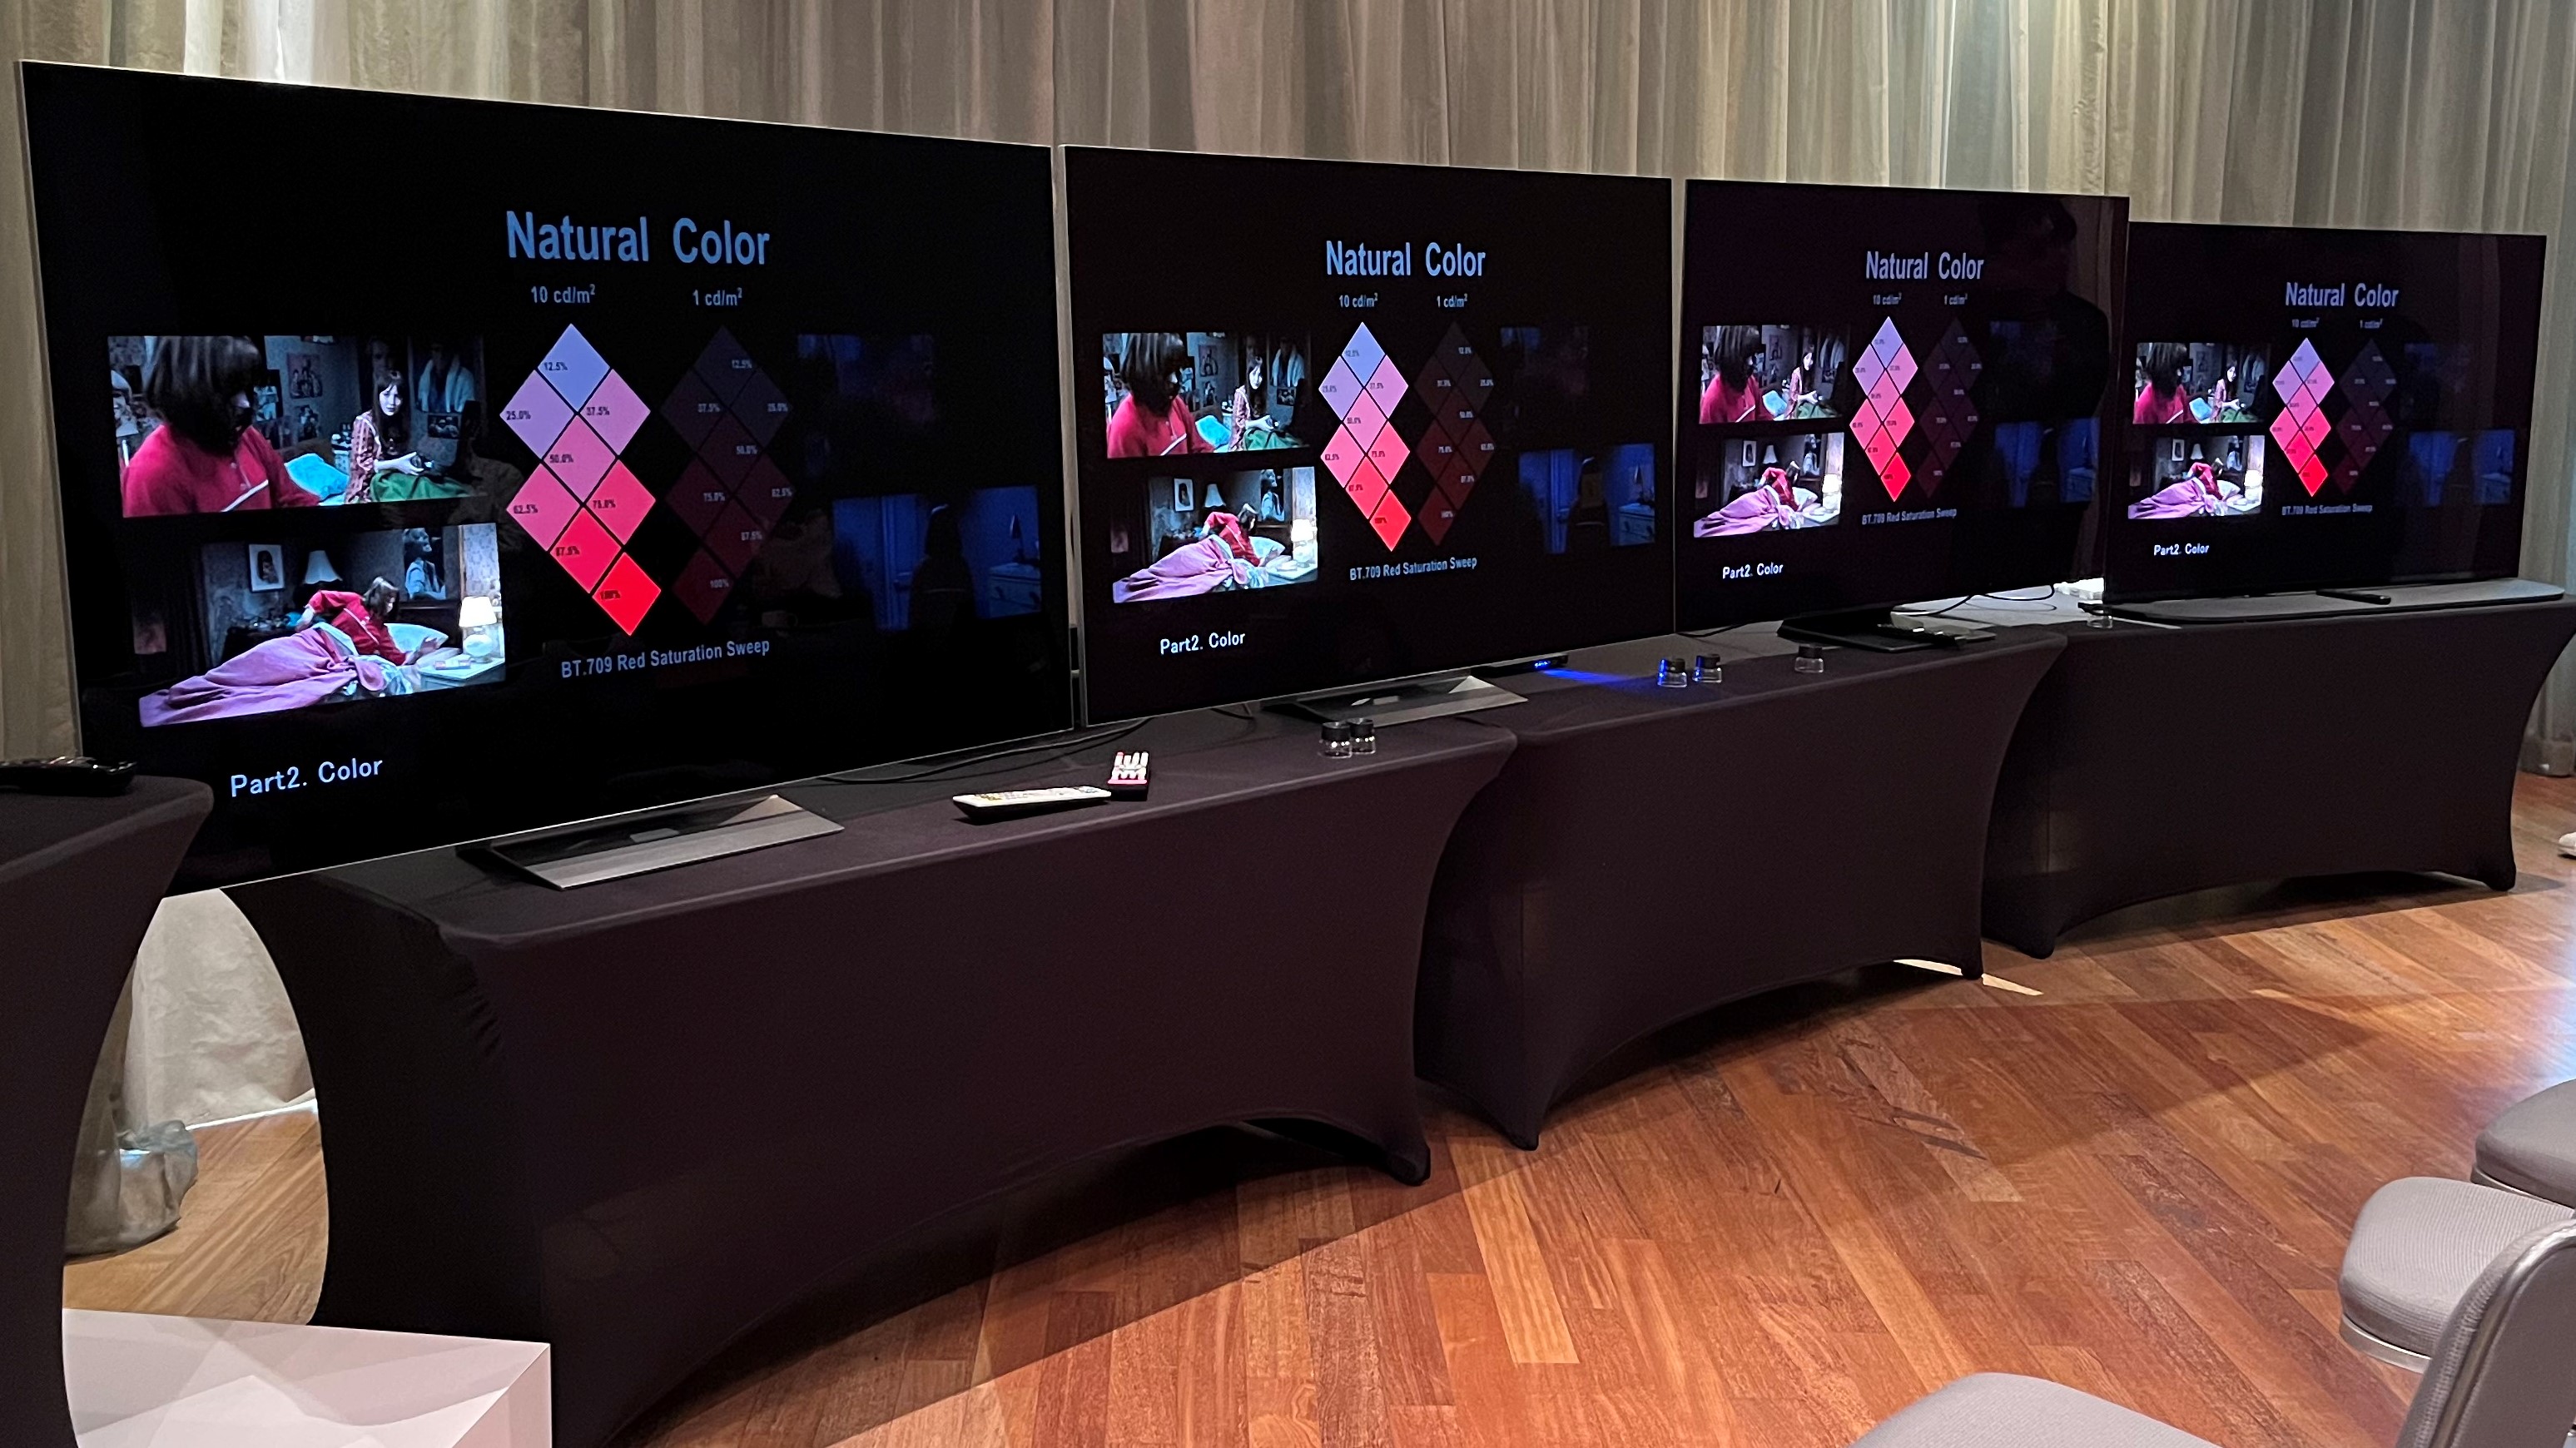 LG G3 OLED TV with other TVs showing test pattern